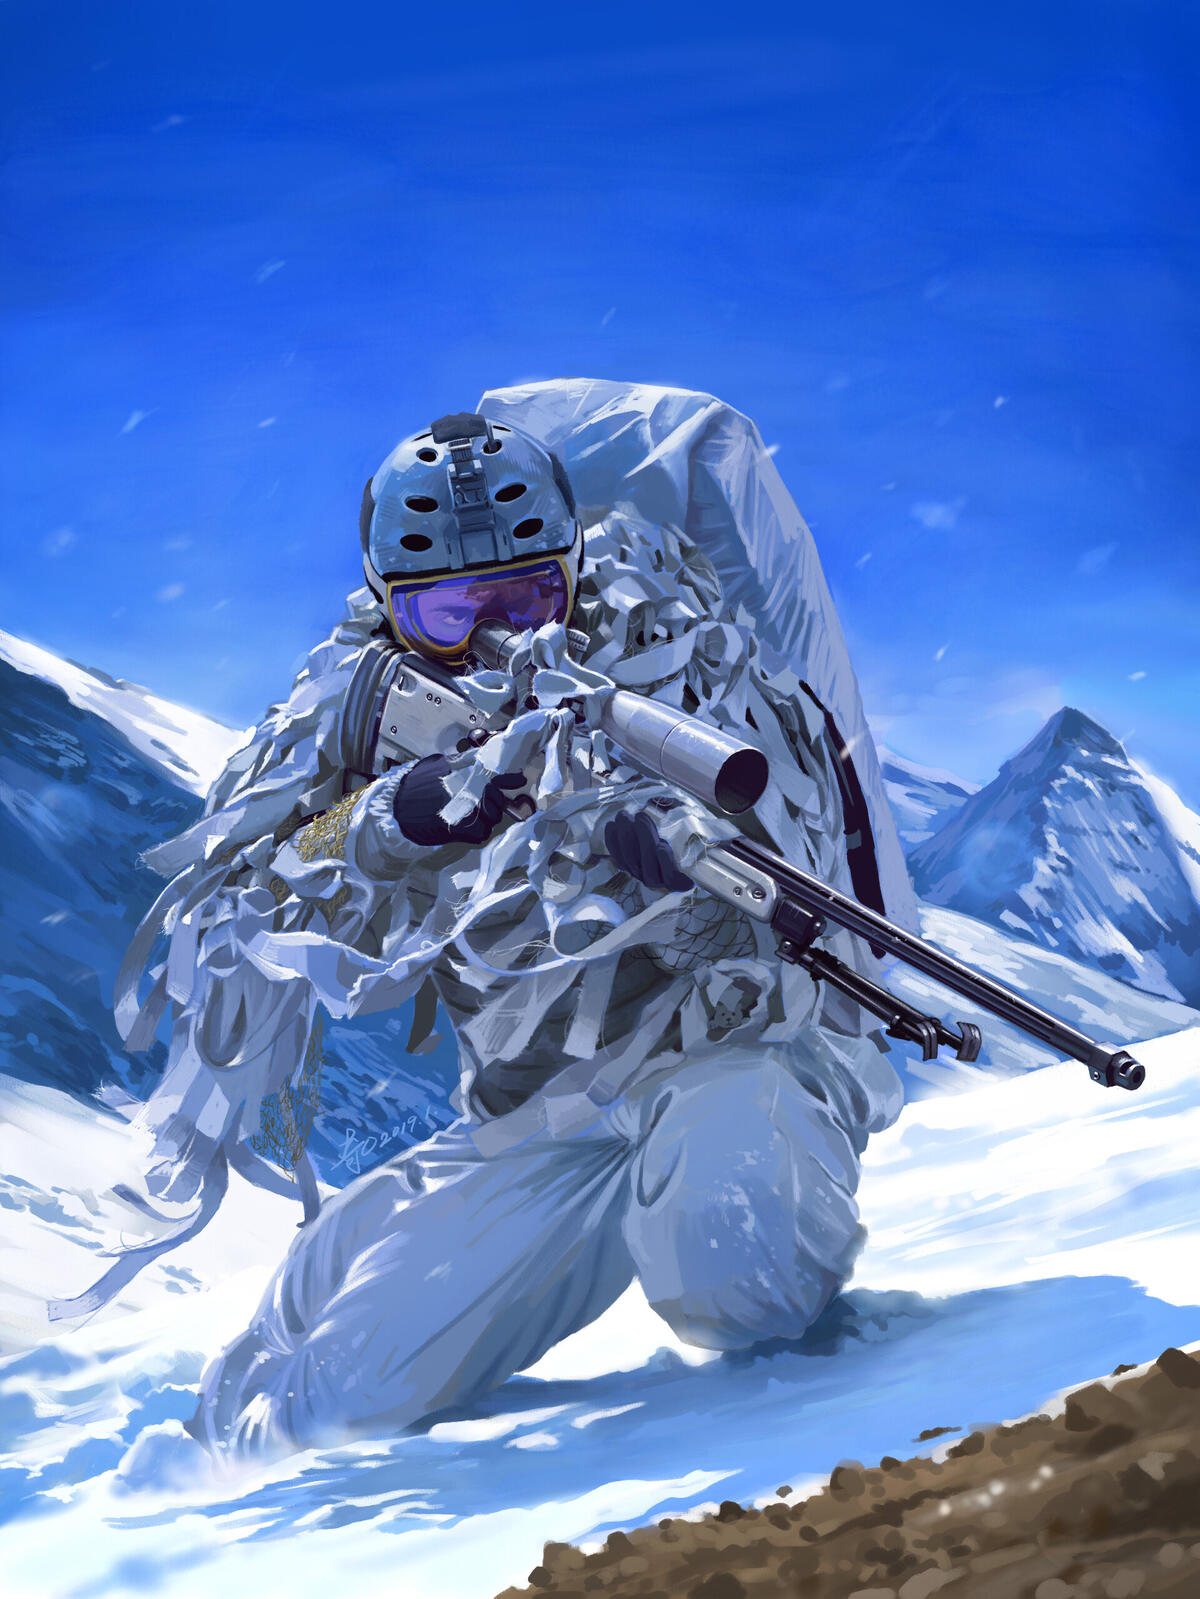 Soldier sniper in white winter camouflage with a rifle